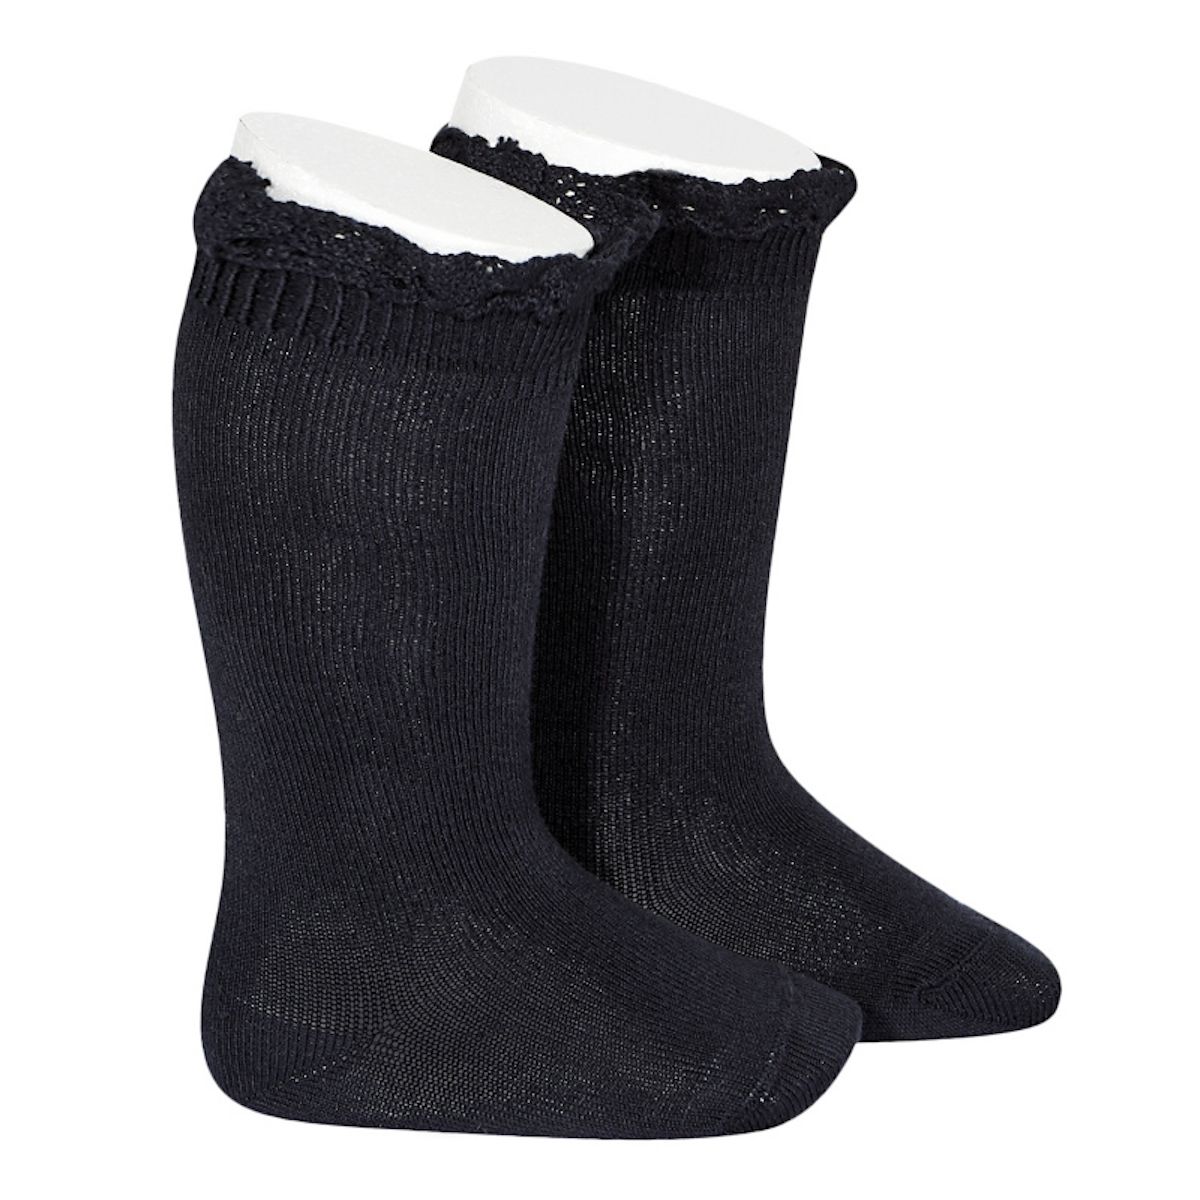 Condor Knee Socks With Lace navy blue 2.